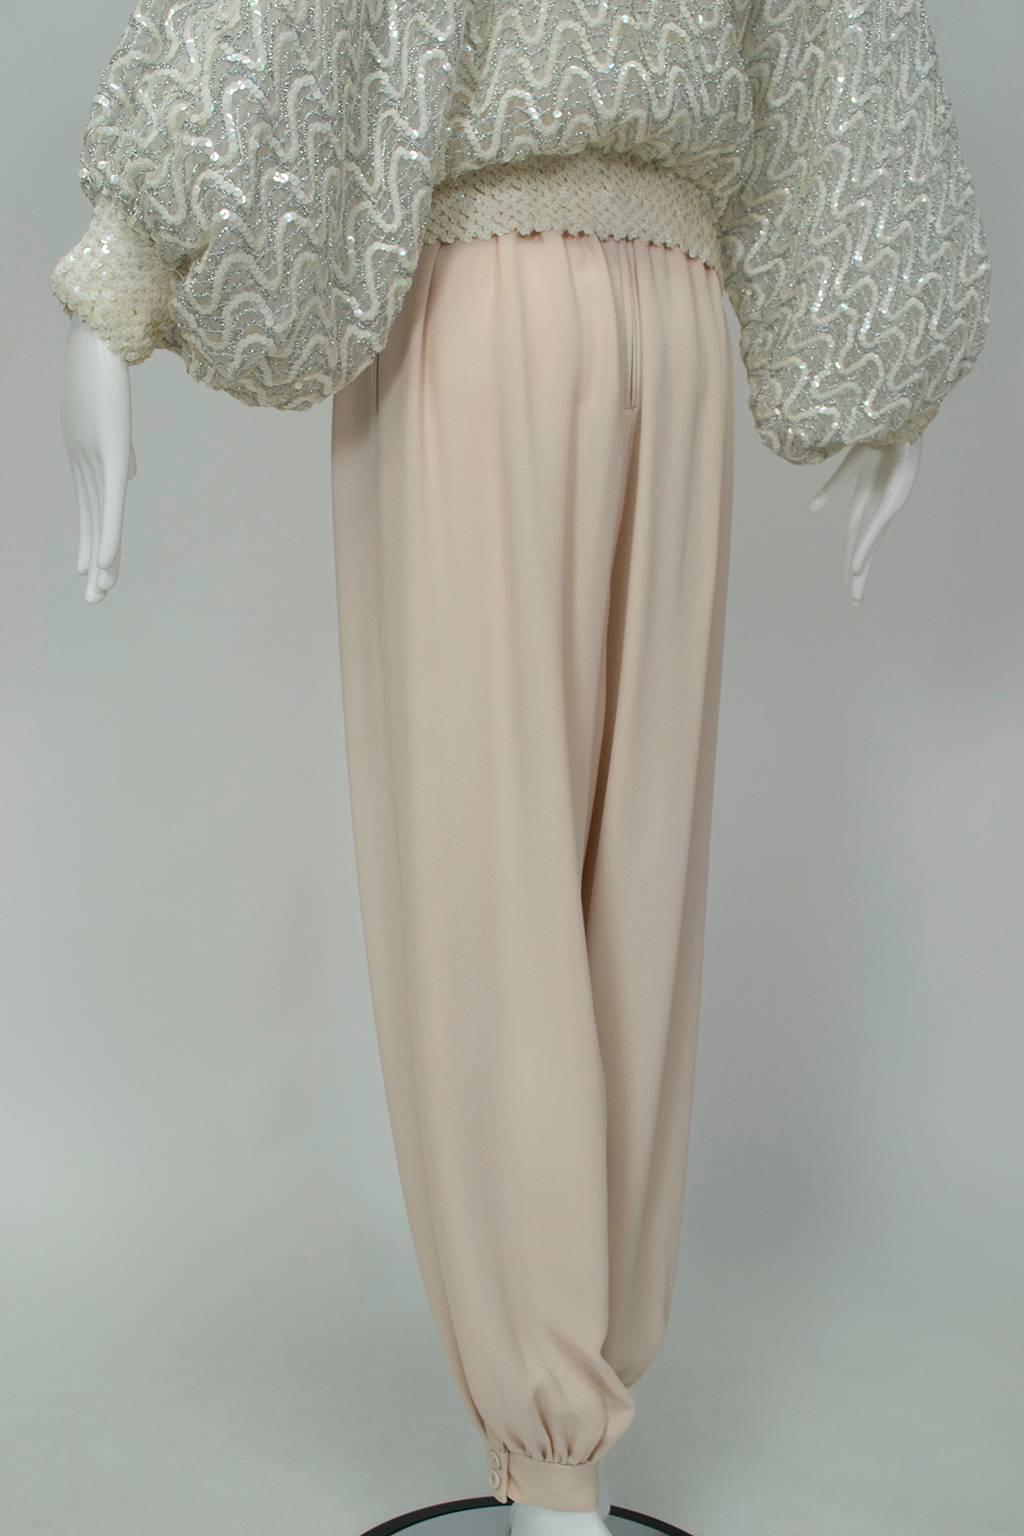 Marrakesh Ivory Sequin Blouson Top and Harem Pant Dinner Pajama Set - S, 1971 For Sale 2